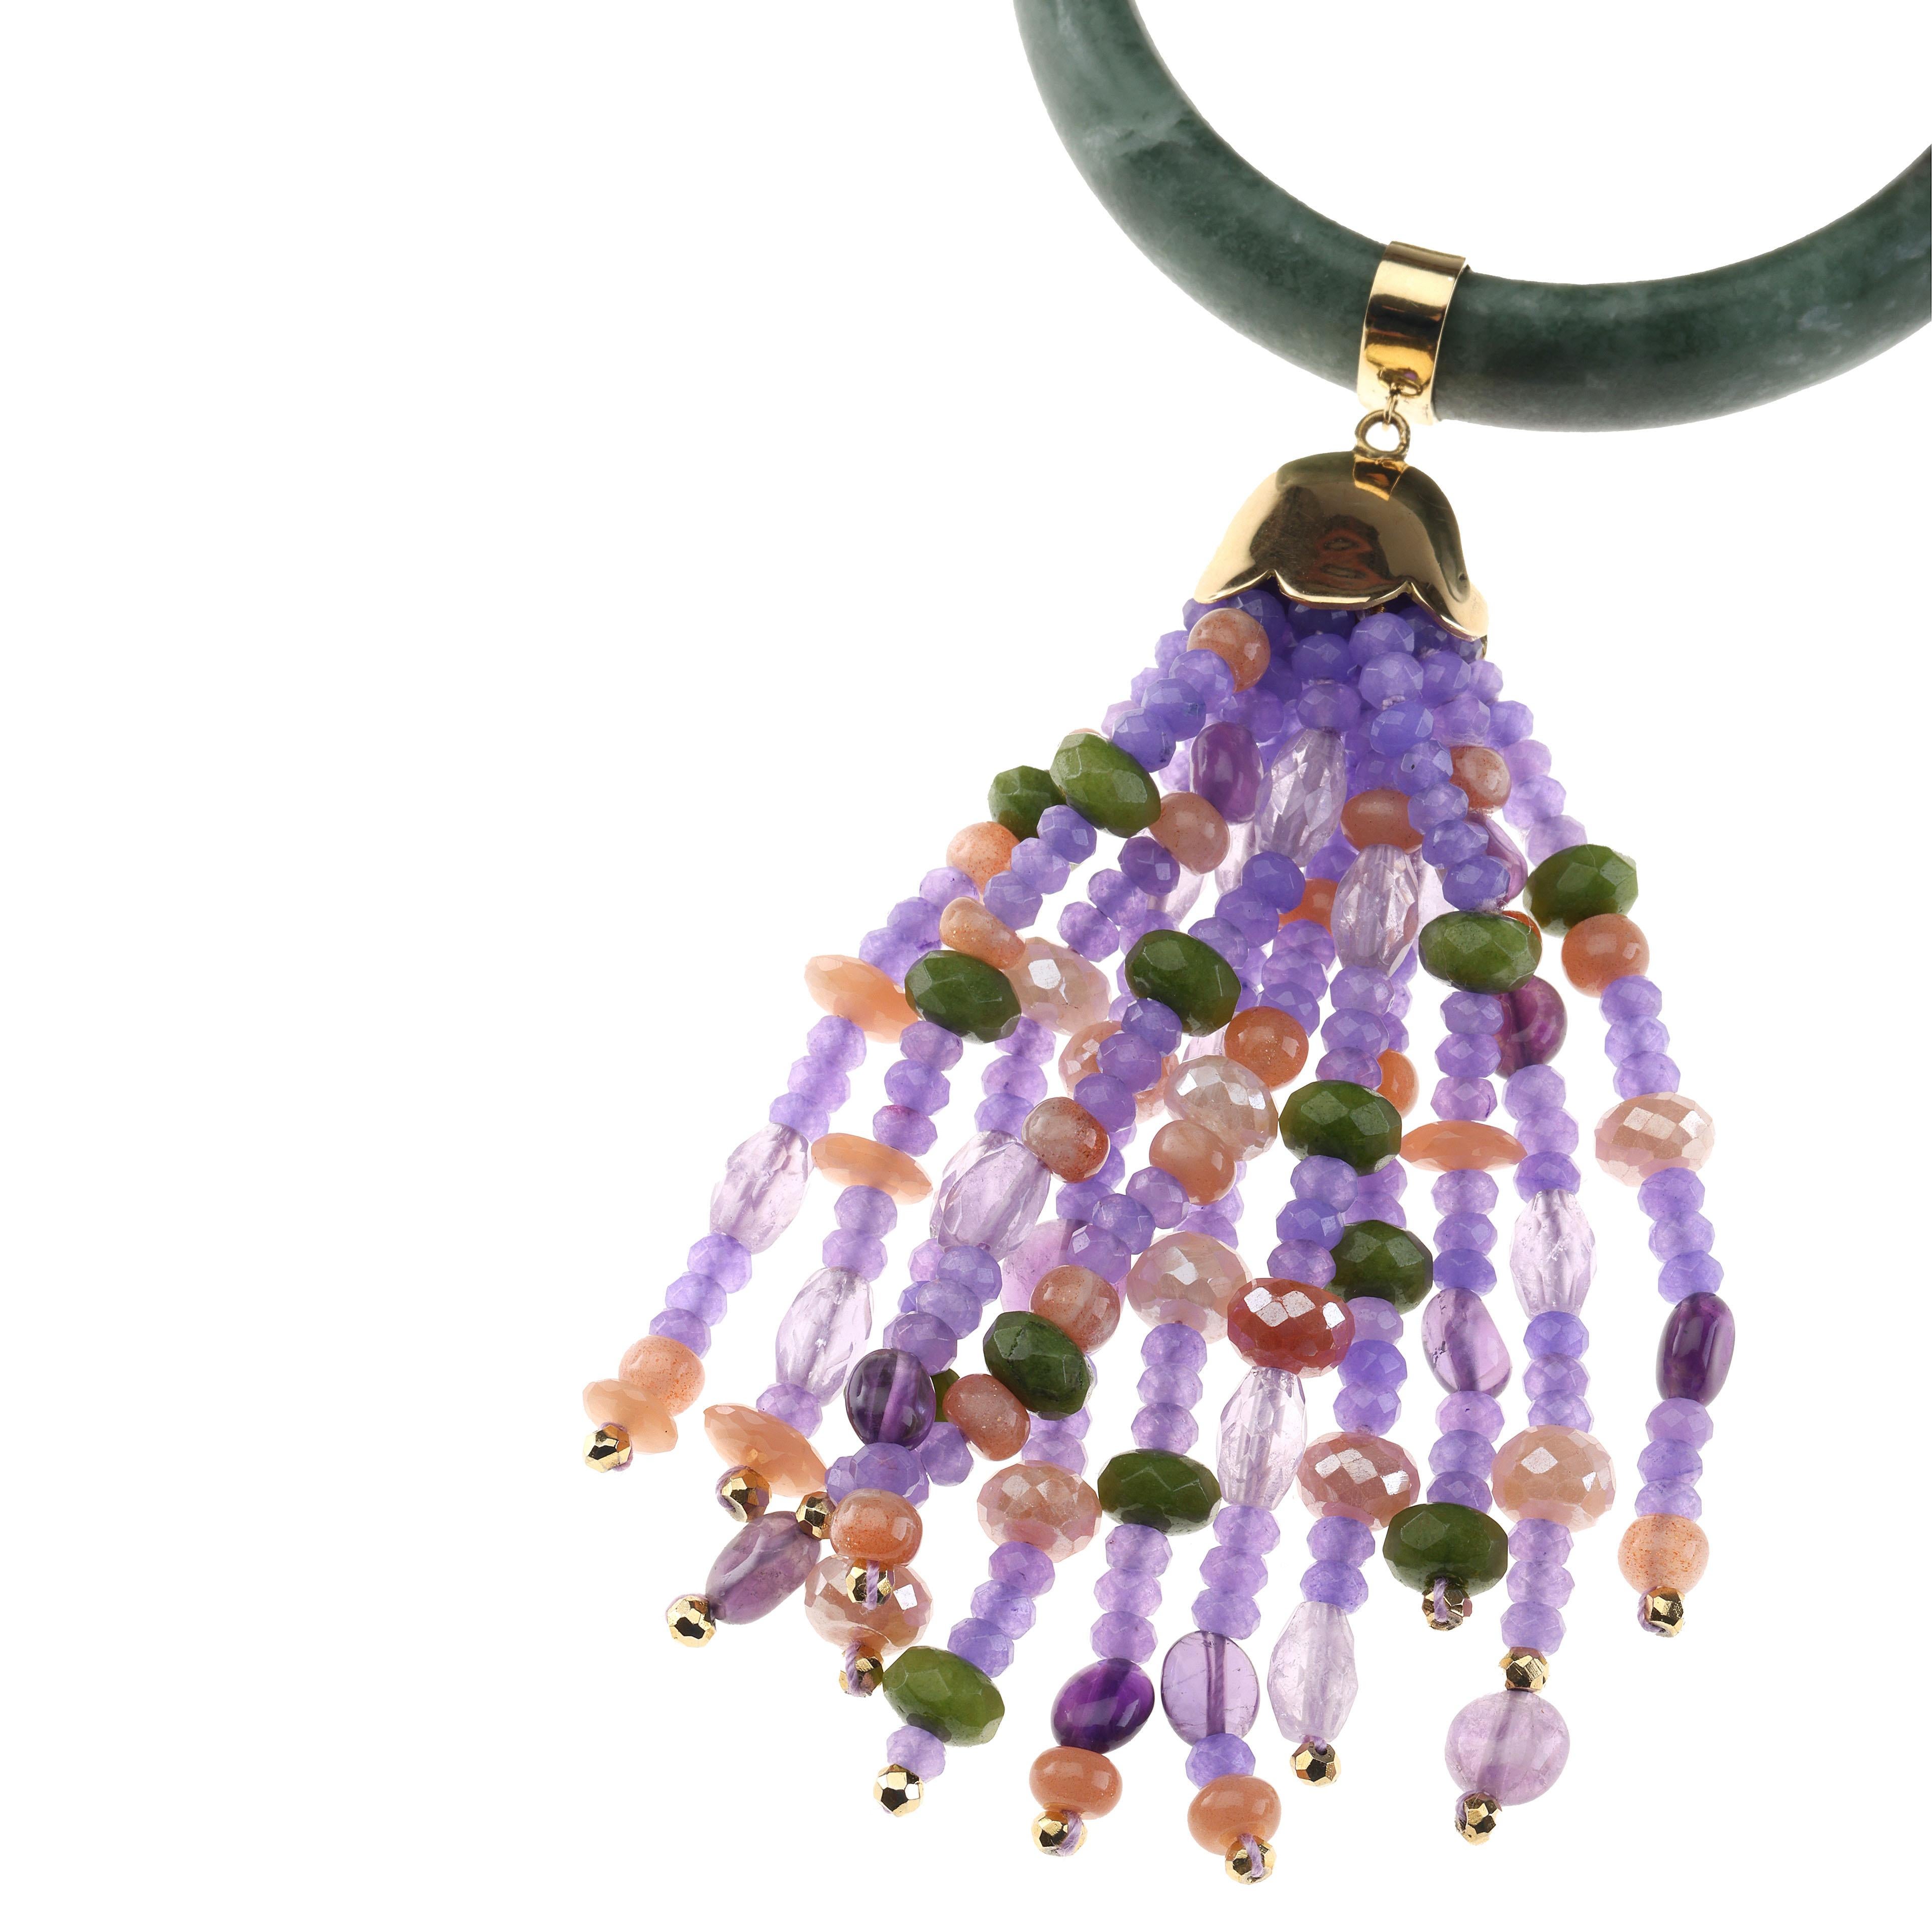 Pendant jade circle with fringe made with lavender jade, green vesuvianite, opal, amethyst.
!8k Gold gr. 12,40.
All Giulia Colussi jewelry is new and has never been previously owned or worn. Each item will arrive at your door beautifully gift